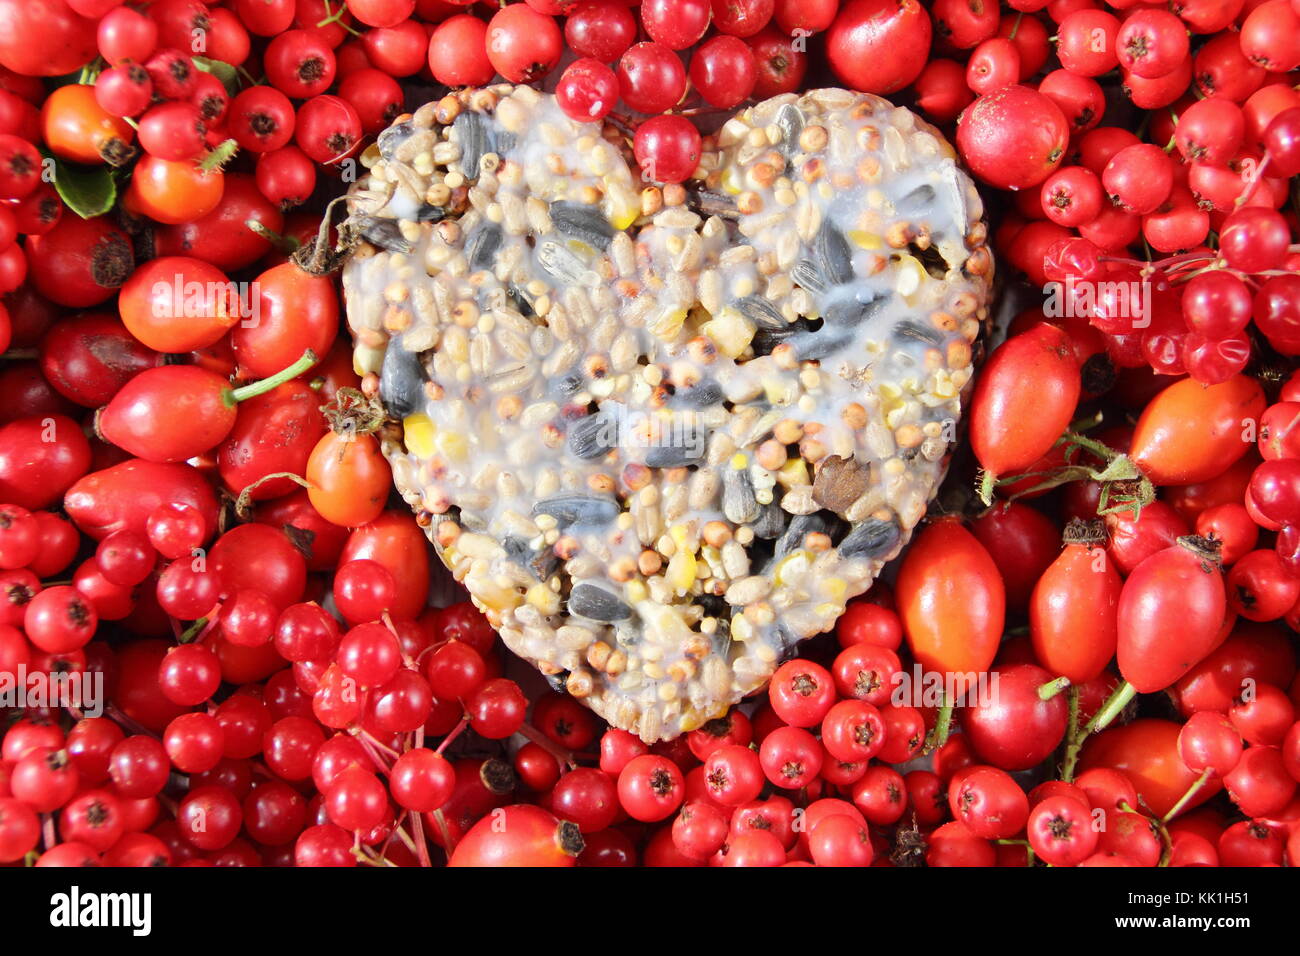 Heart shaped bird feeder made with seeds and melted fat, shaped in a cookie cutter, decorated with wild bird food: rose hips, berries and crab apples Stock Photo